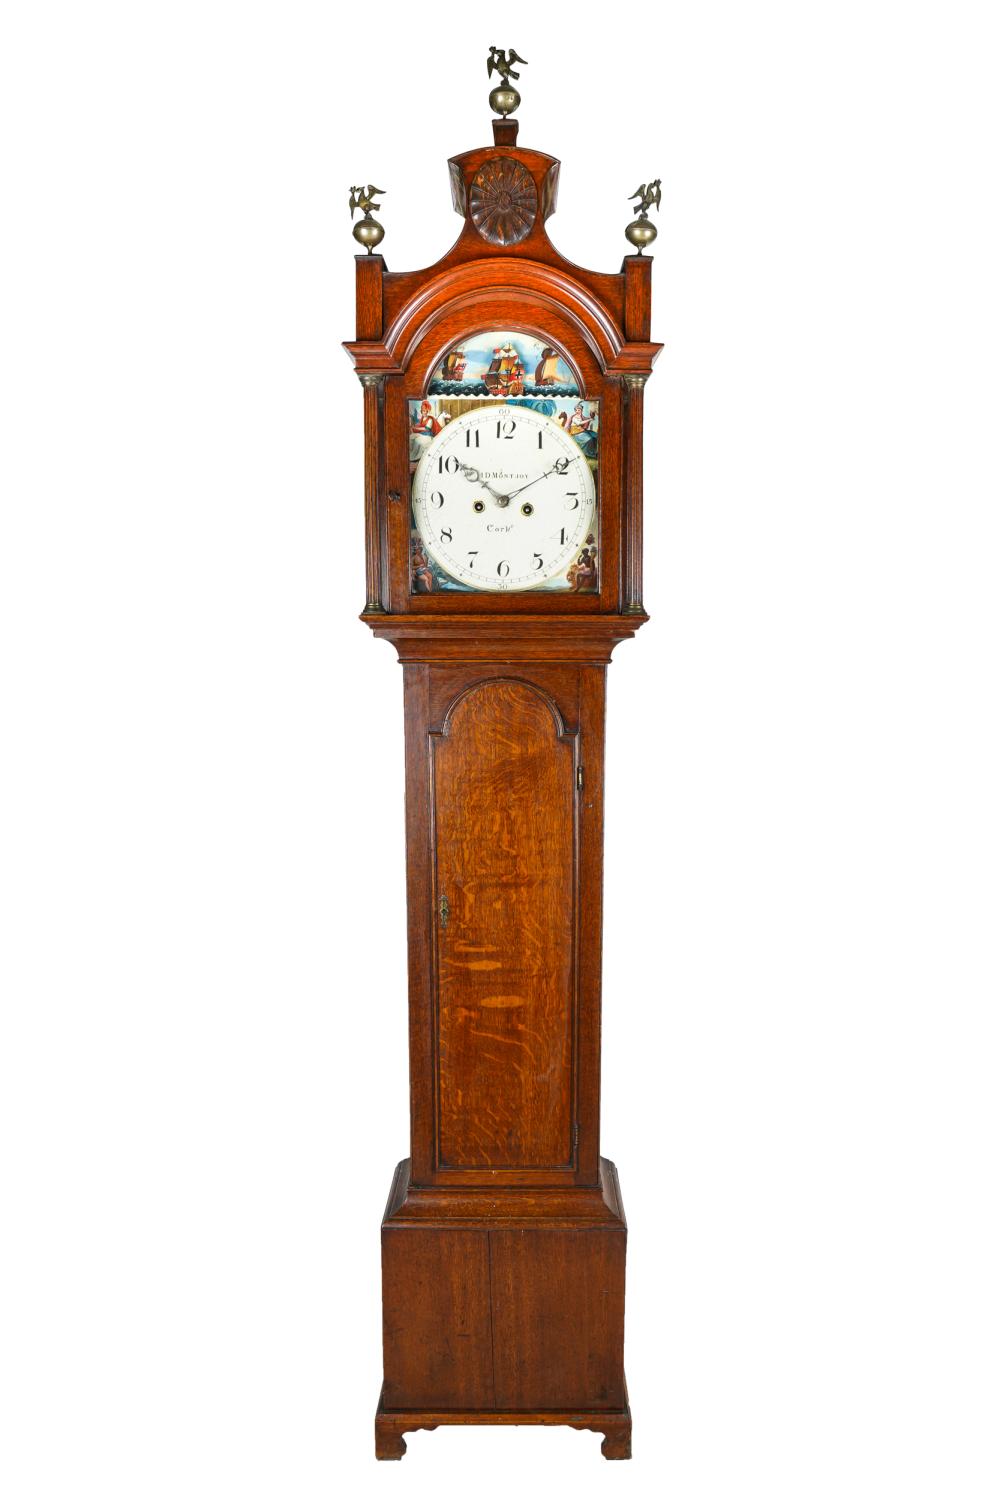 I.D. MONTJOY TALL CASE CLOCKwith